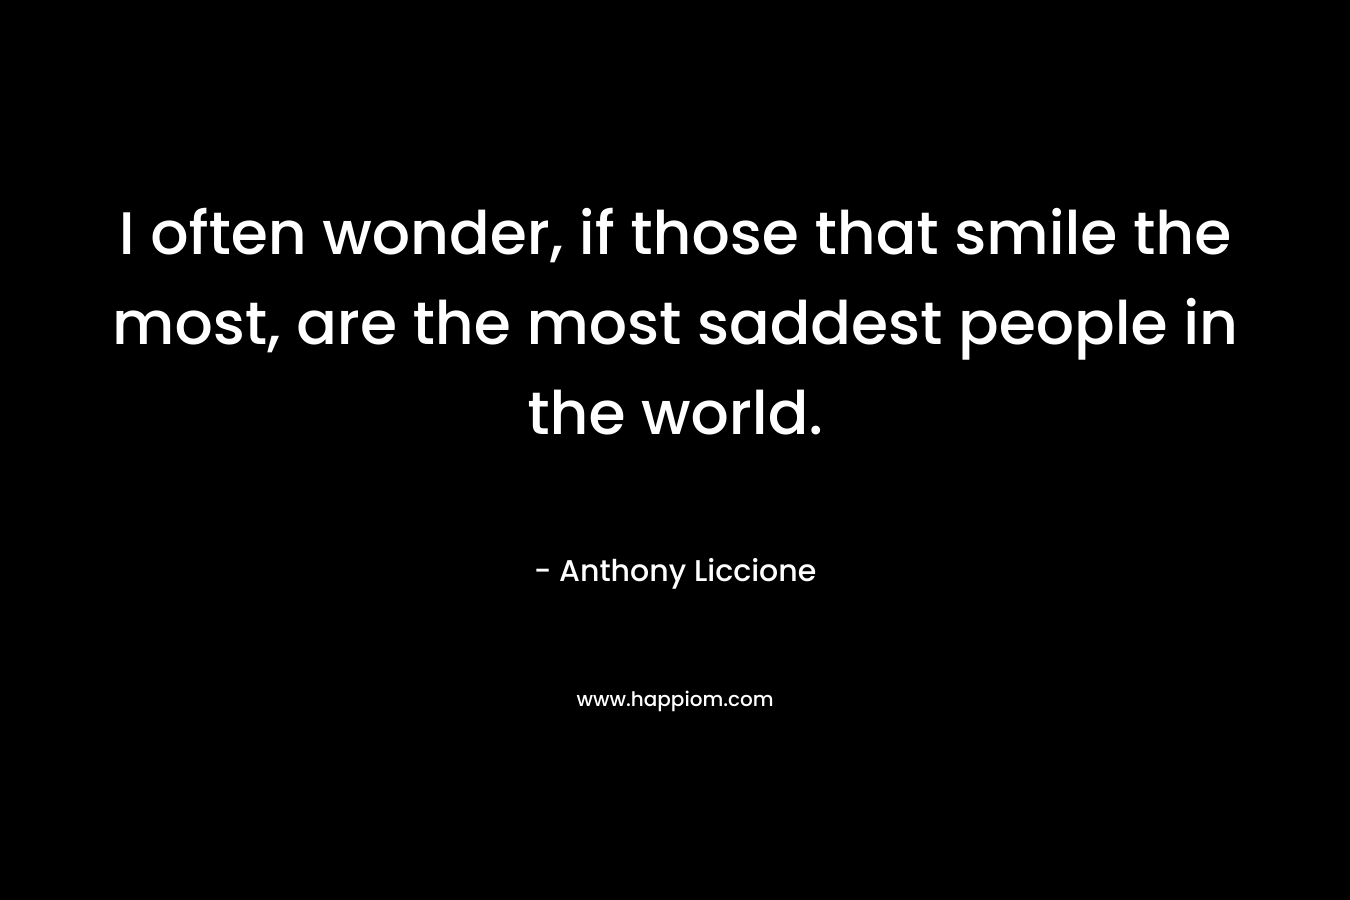 I often wonder, if those that smile the most, are the most saddest people in the world.